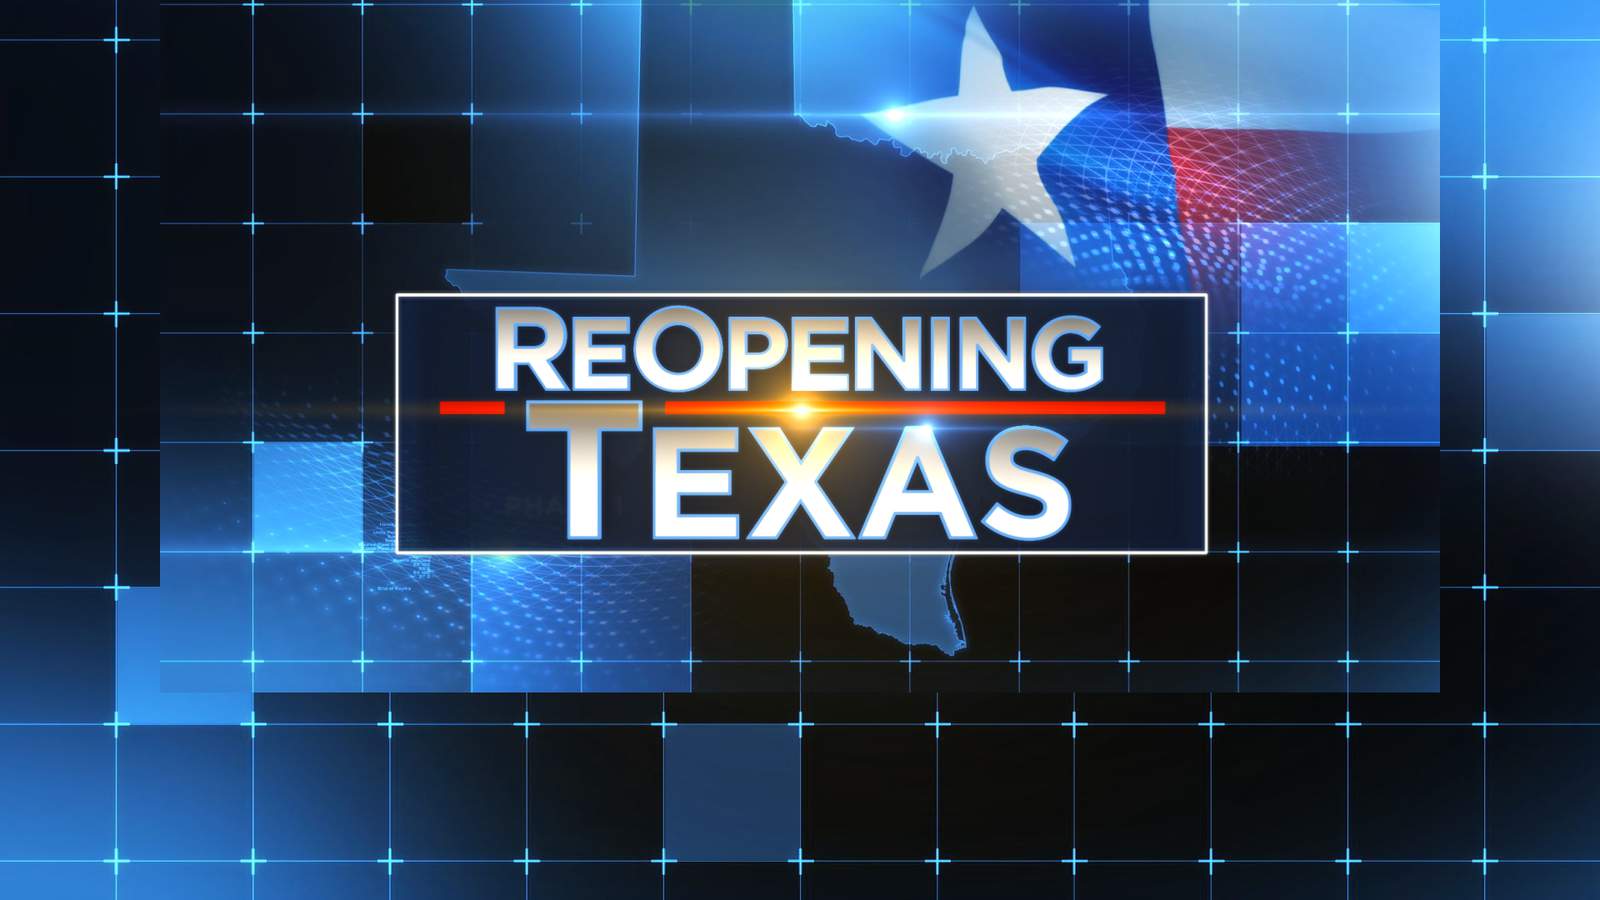 Reopening Texas: Bars, bowling alleys, bingo halls among businesses that can reopen Friday